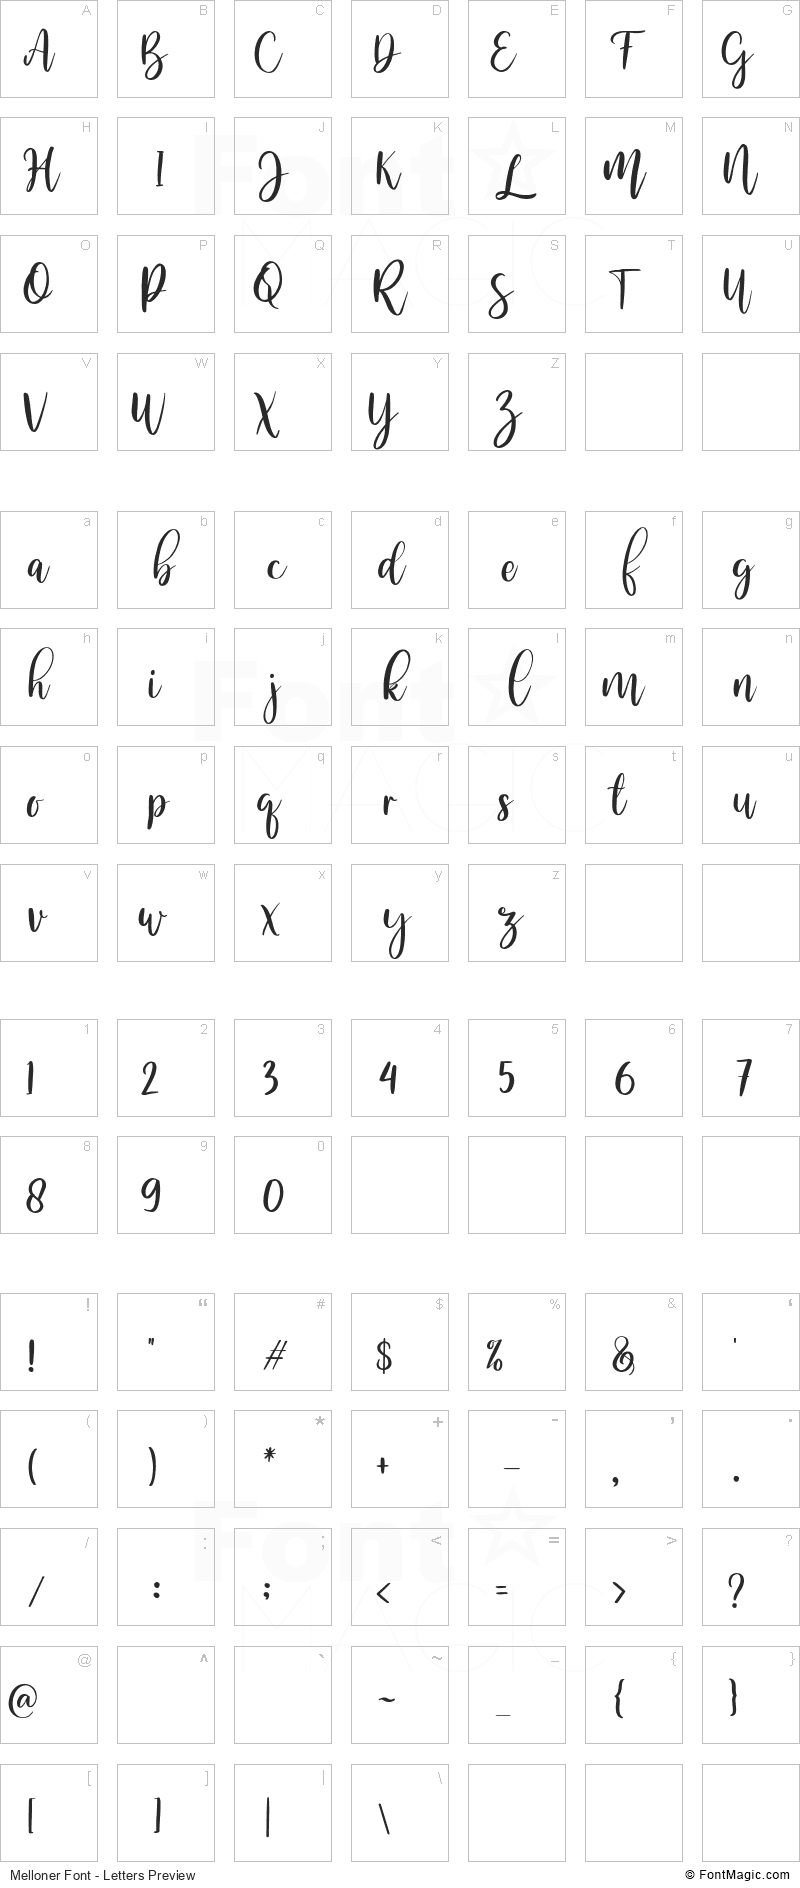 Melloner Font - All Latters Preview Chart